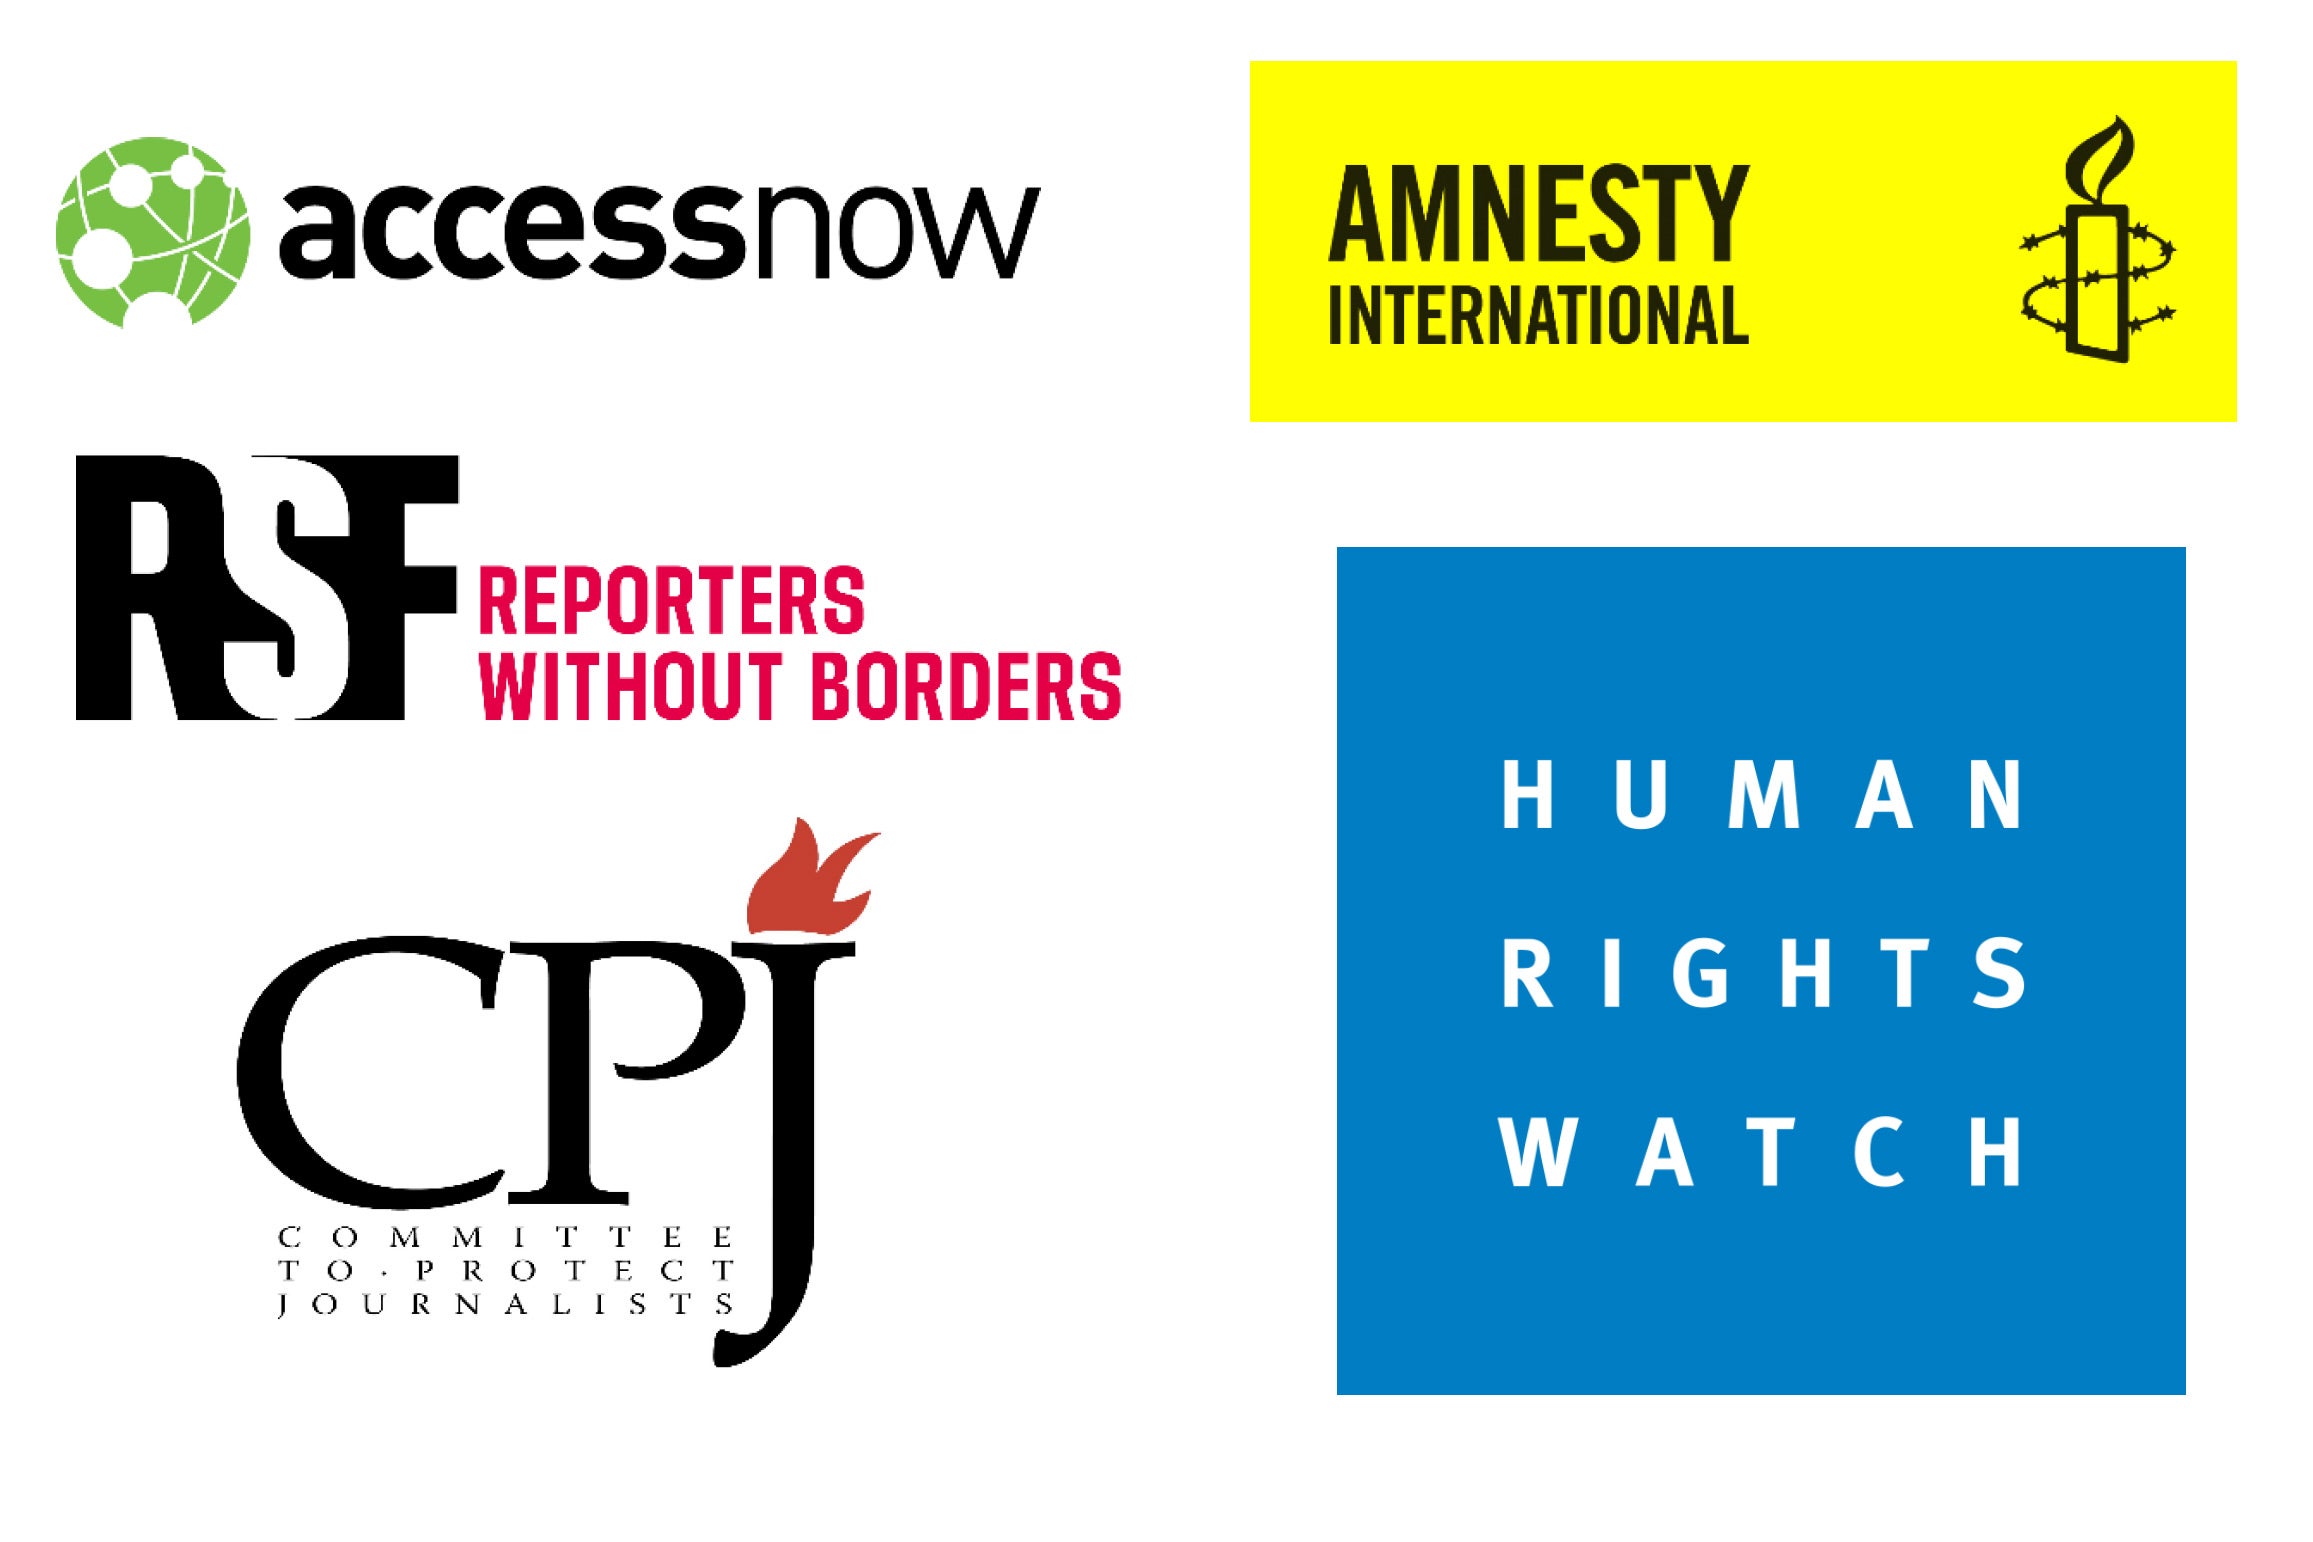 Human Rights Watch, Access Now, Amnesty International, Committee to Protect Journalists, and Reporters Without Borders call for robust implementation of new EU export control rules on surveillance technology and investigation of EU member states’ role in Pegasus affair